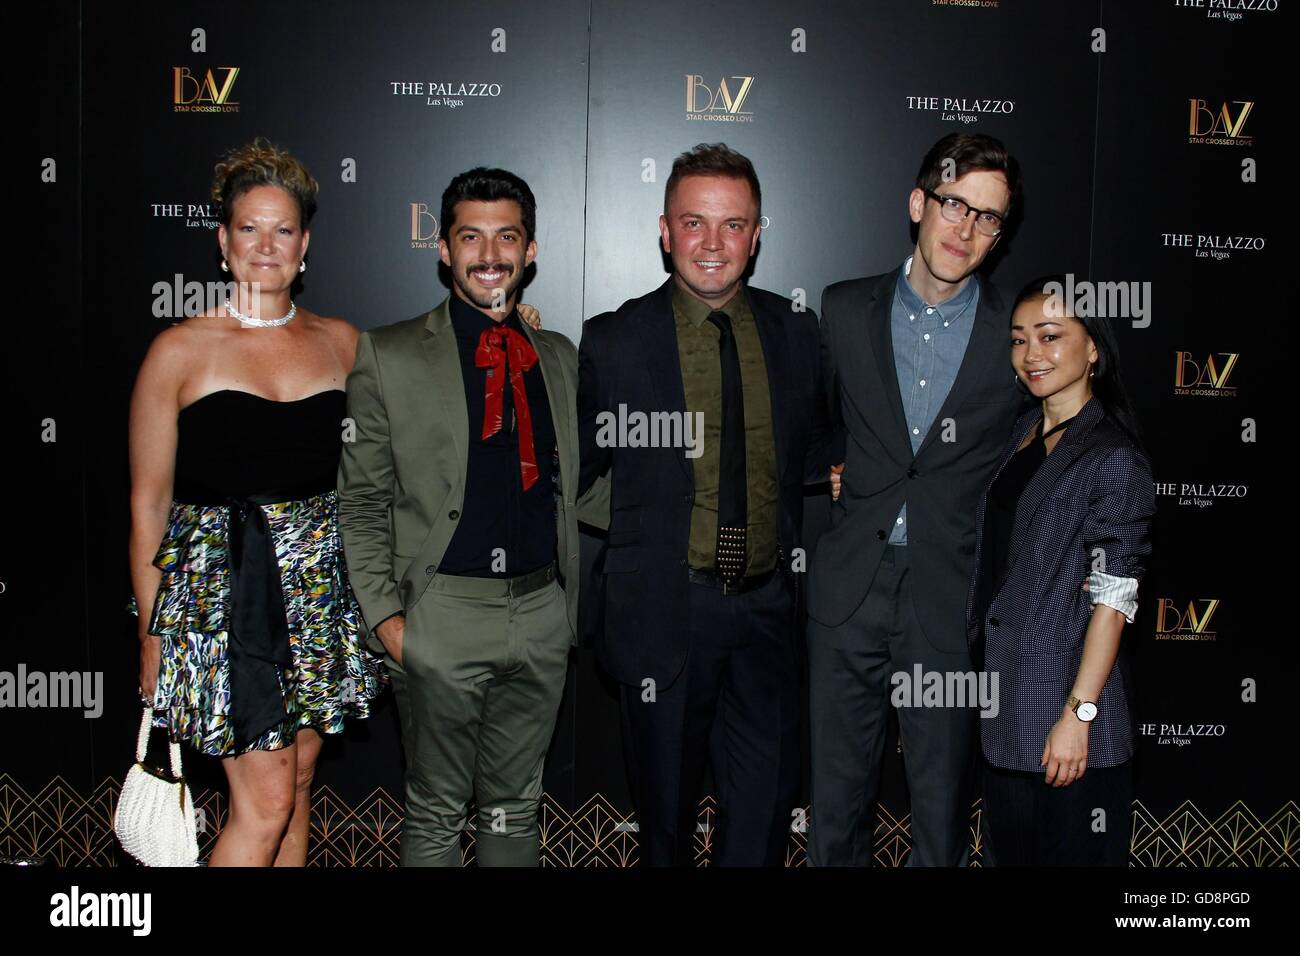 Siobhan O'Neil (Producer), Steve Mazurek (Costume designer), Shane Scheel (co-creator/producer), Anderson Davis (co-creator/producer) and Sumie Maeda (Associate director) at arrivals for BAZ - Star Crossed Love Opening Celebration, The Palazzo Theatre, Las Vegas, NV July 12, 2016. Photo By: James Atoa/Everett Collection Stock Photo